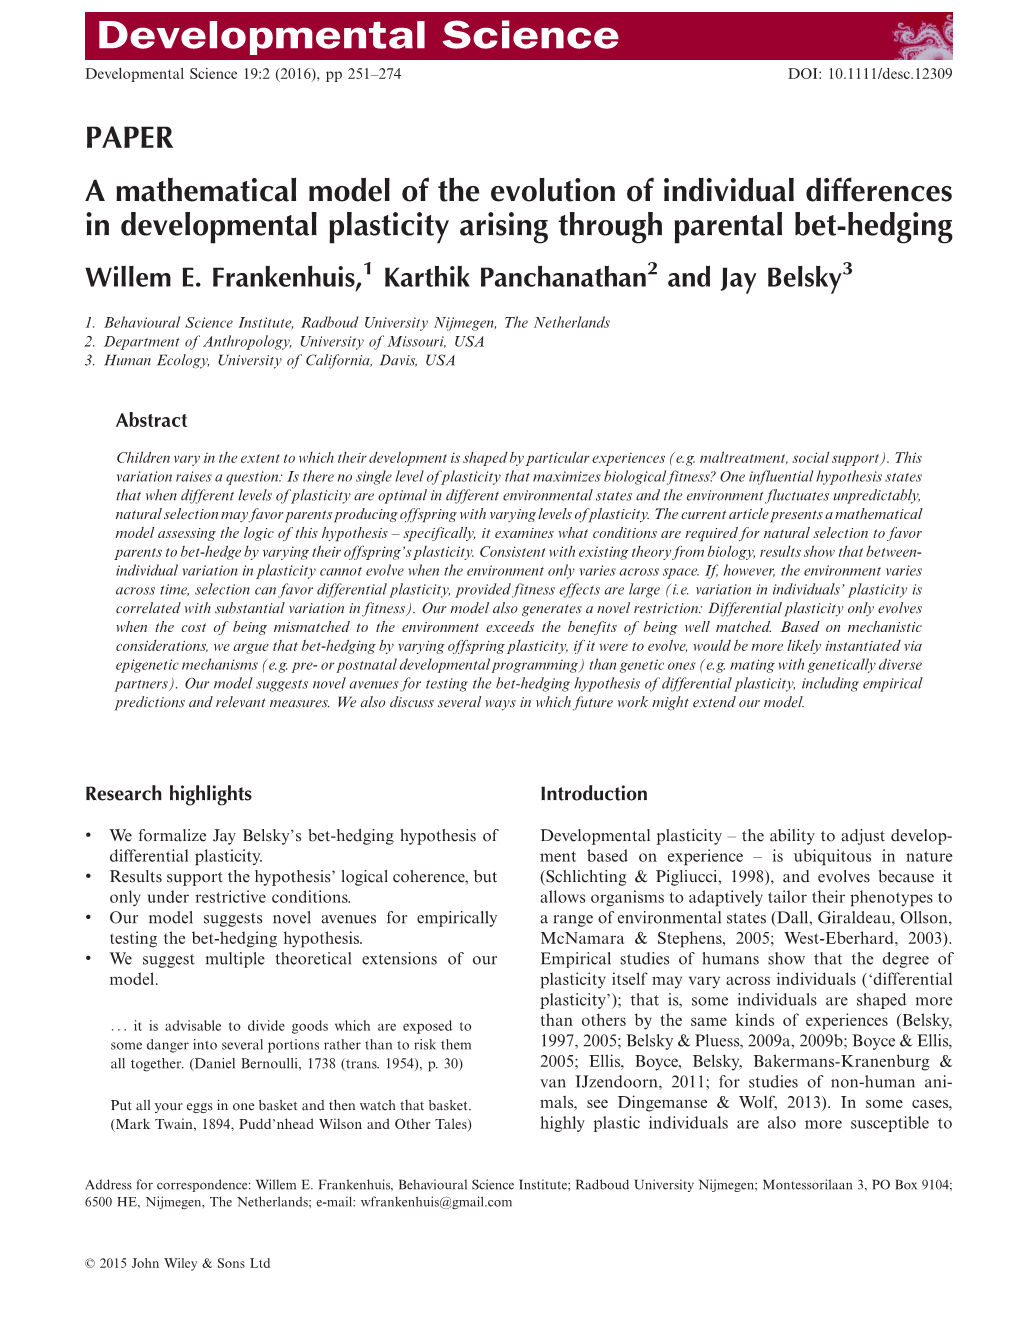 PAPER a Mathematical Model of the Evolution of Individual Differences in Developmental Plasticity Arising Through Parental Bet-Hedging Willem E